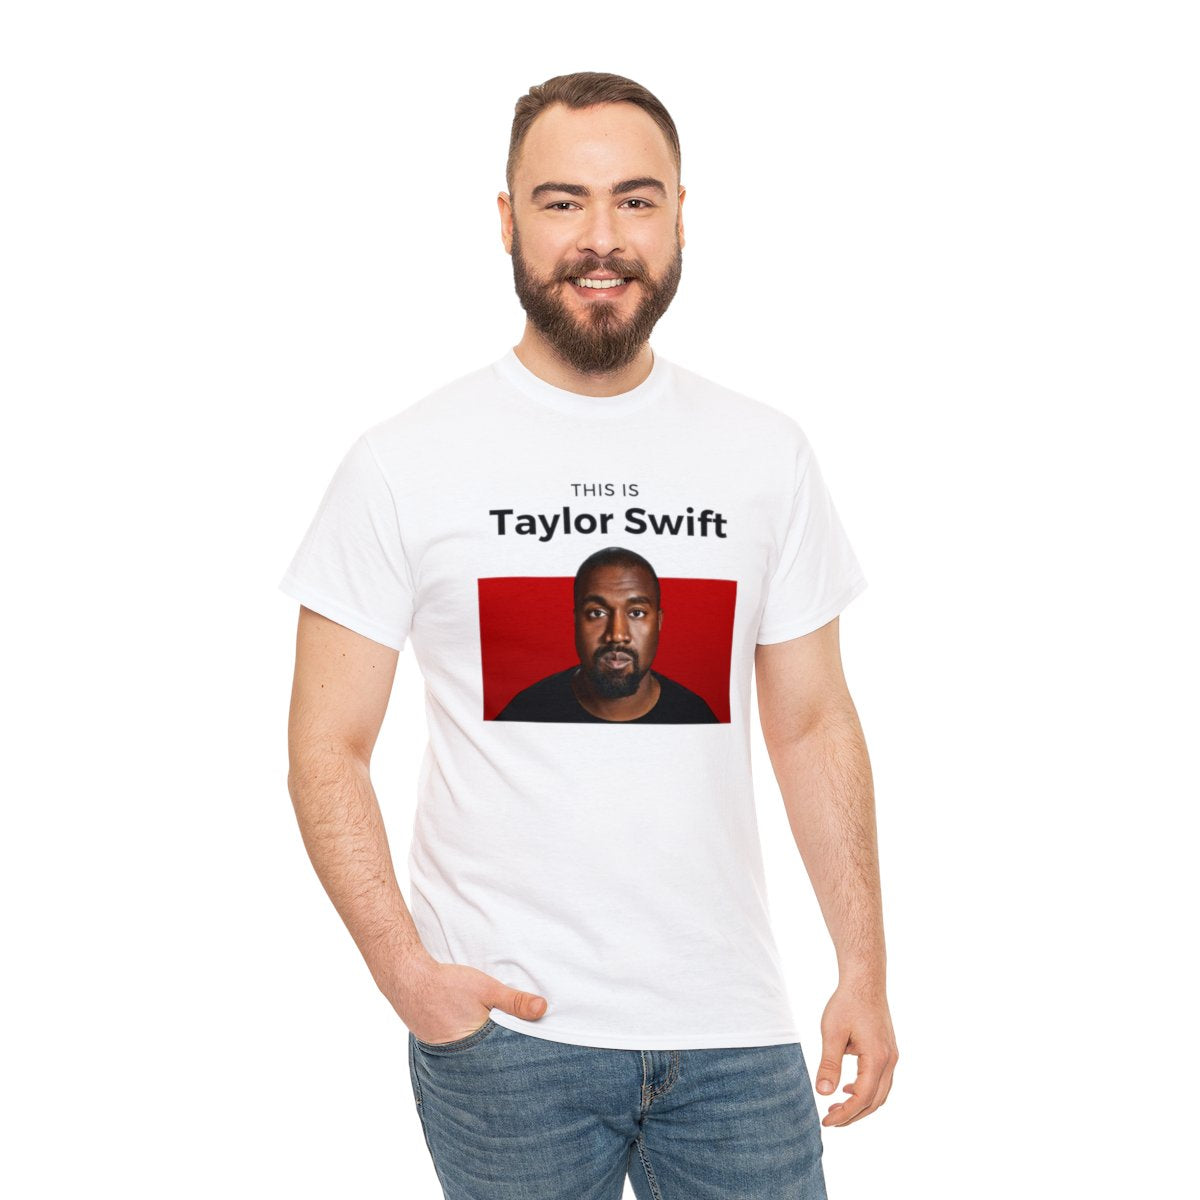 This is Taylor Swift (Kanye West) - Unisex Heavy Cotton Tee